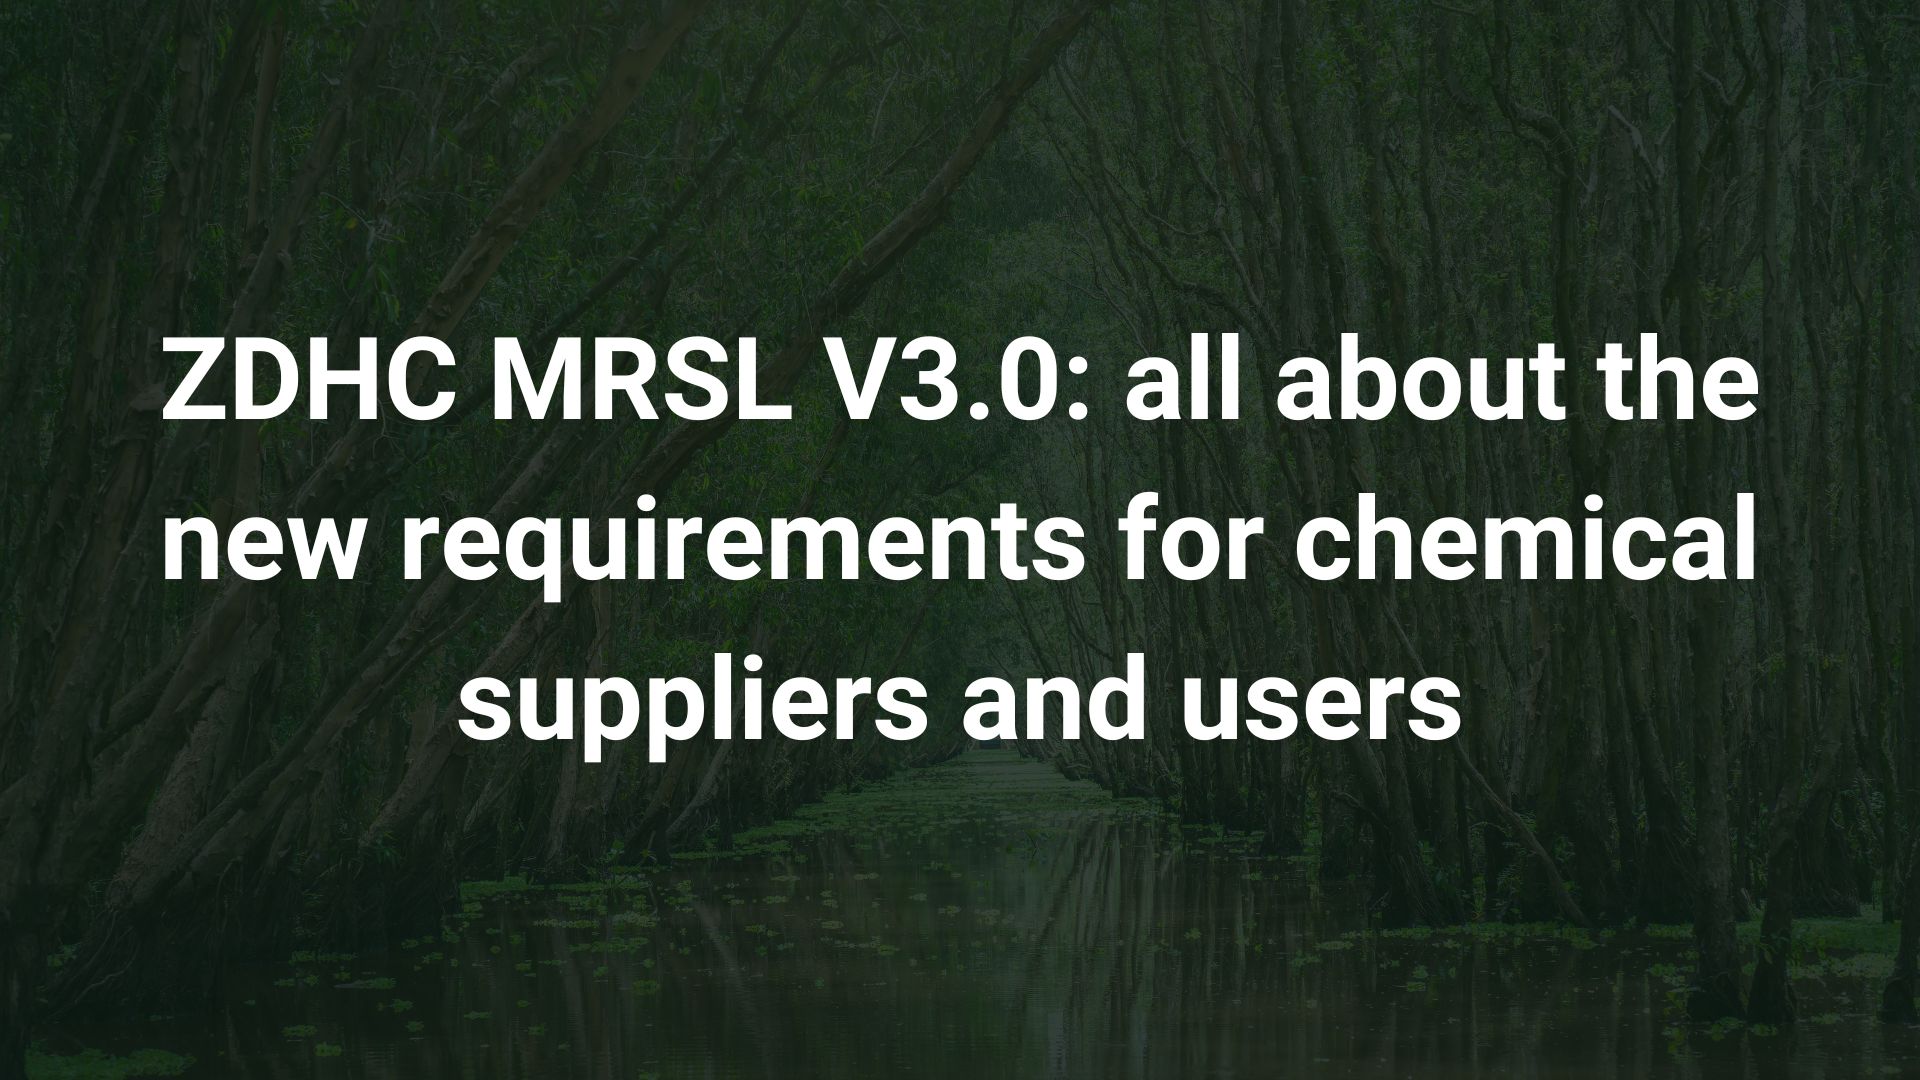 ZDHC MRSL V3.0: all about the new requirements for chemical suppliers and users